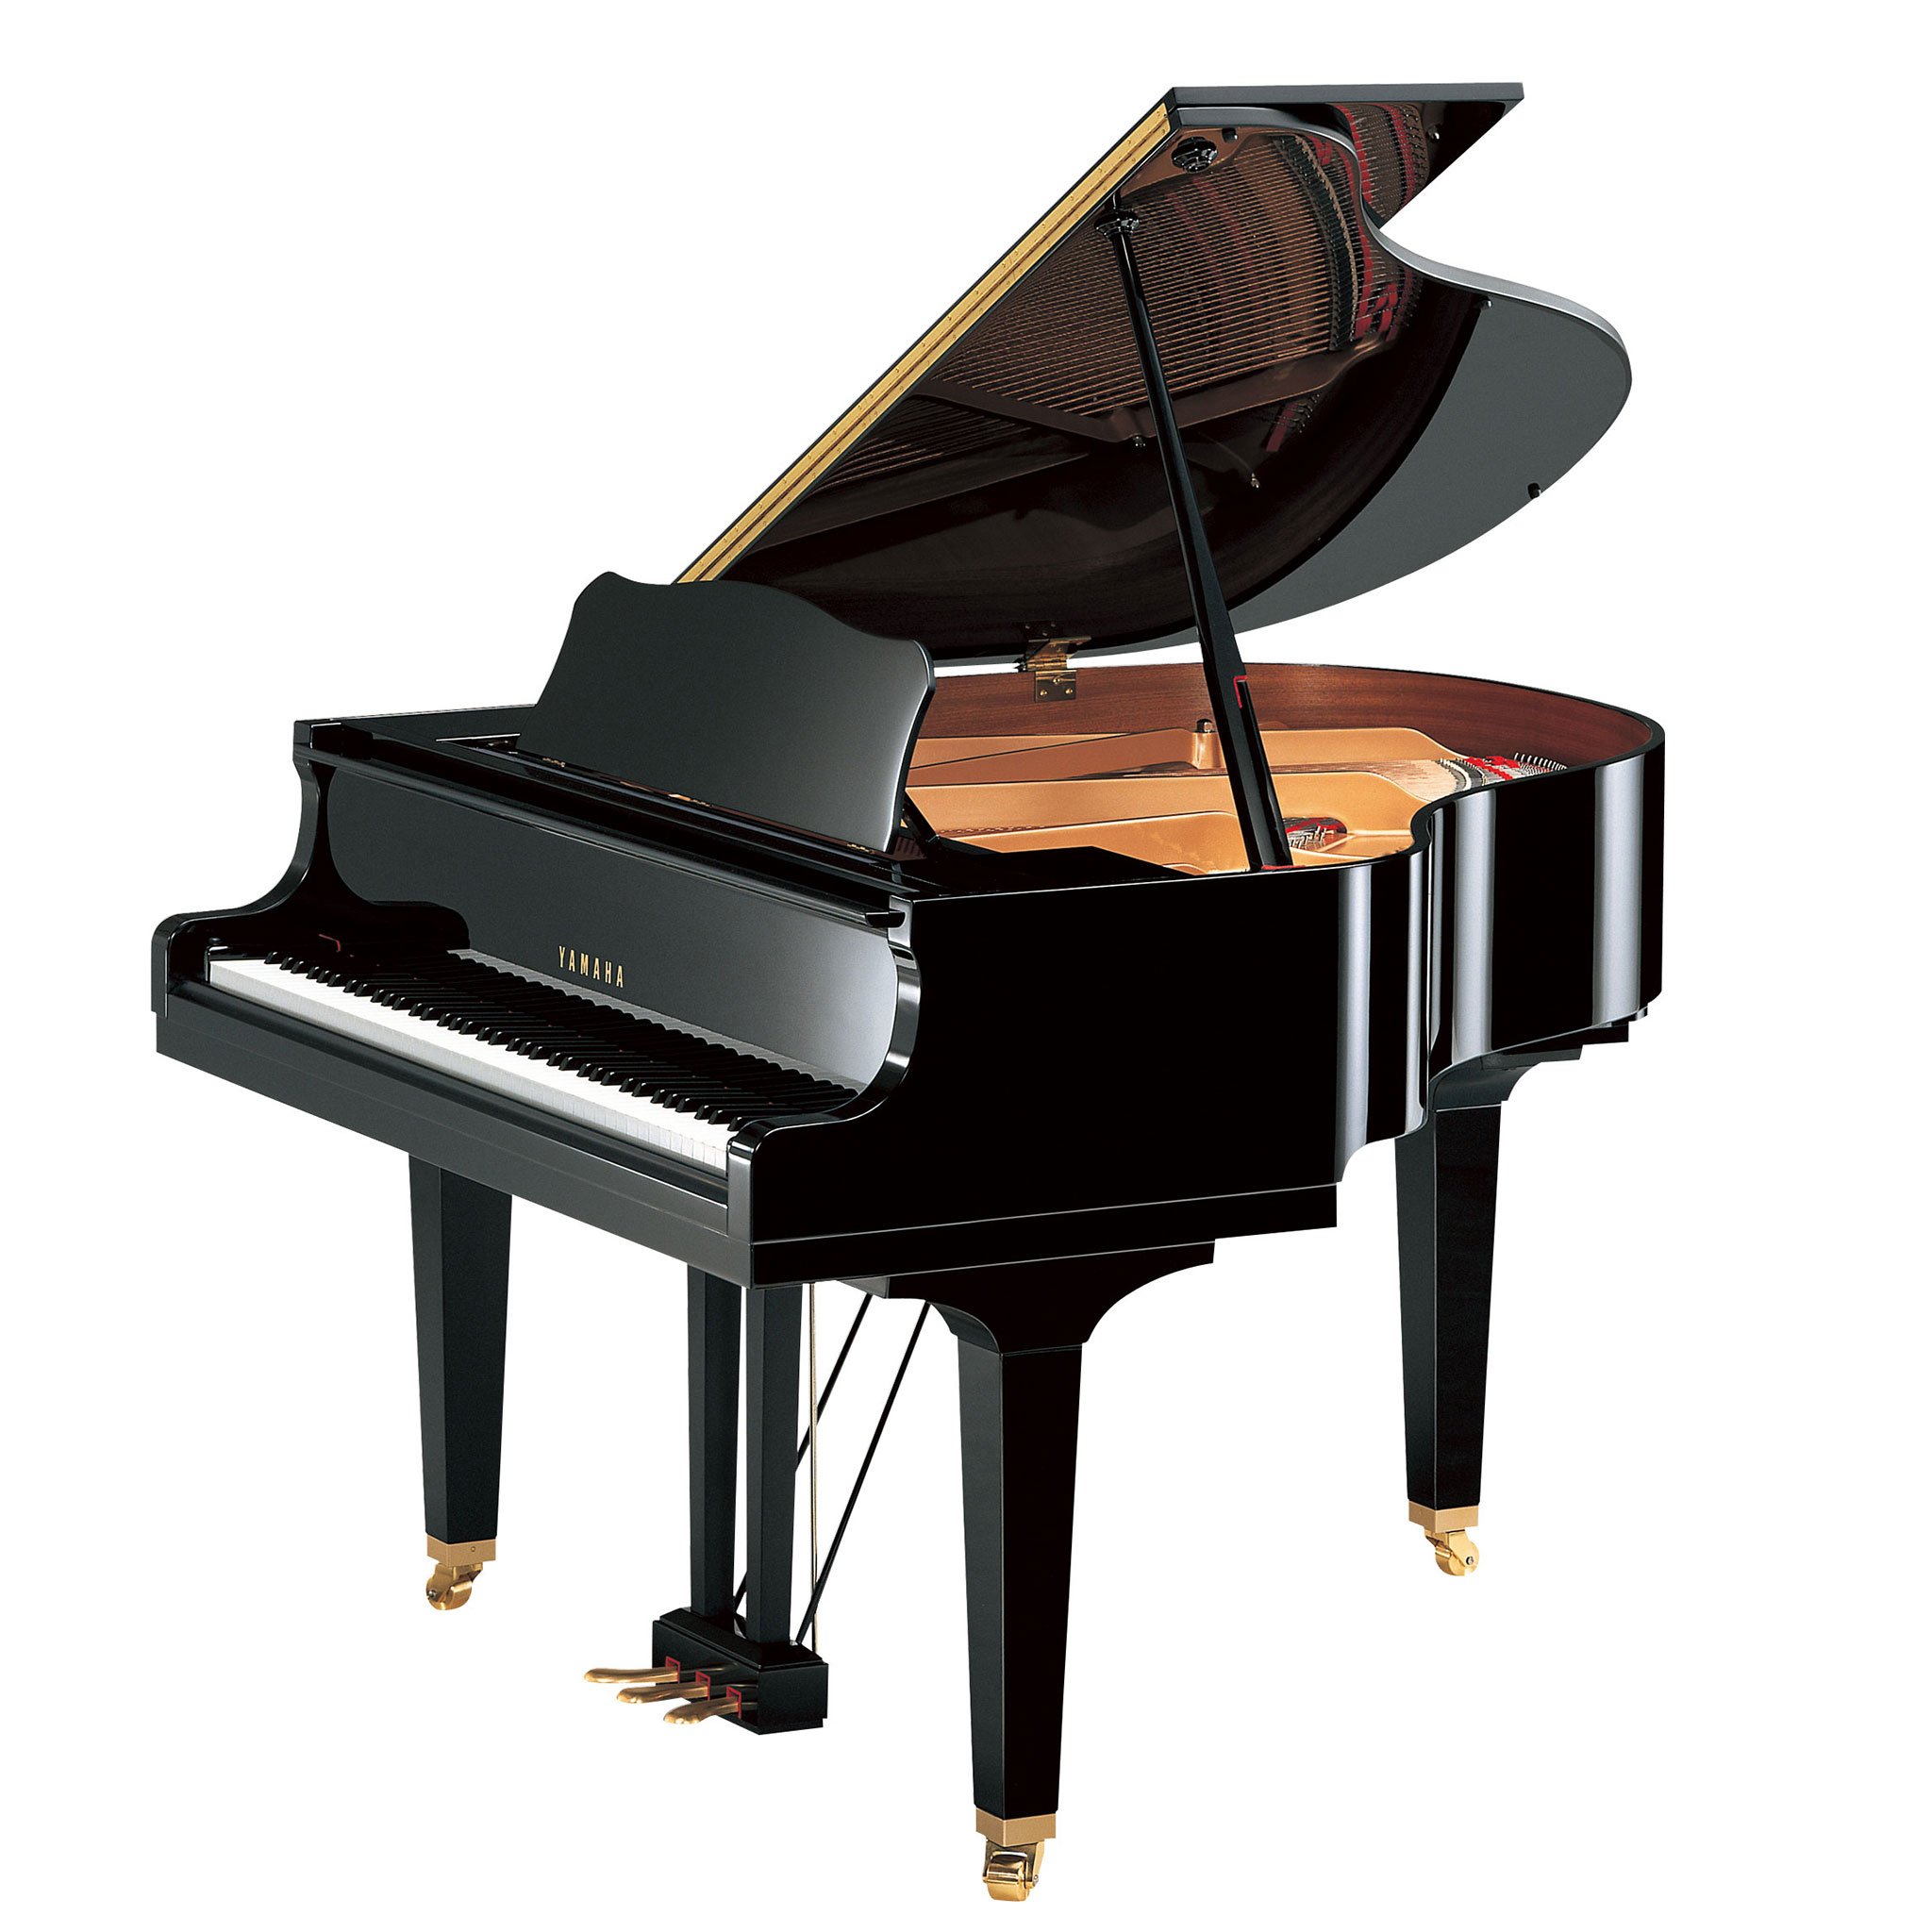 
Yamaha Studio Piano: The Ultimate Guide For Musicians And Beginners